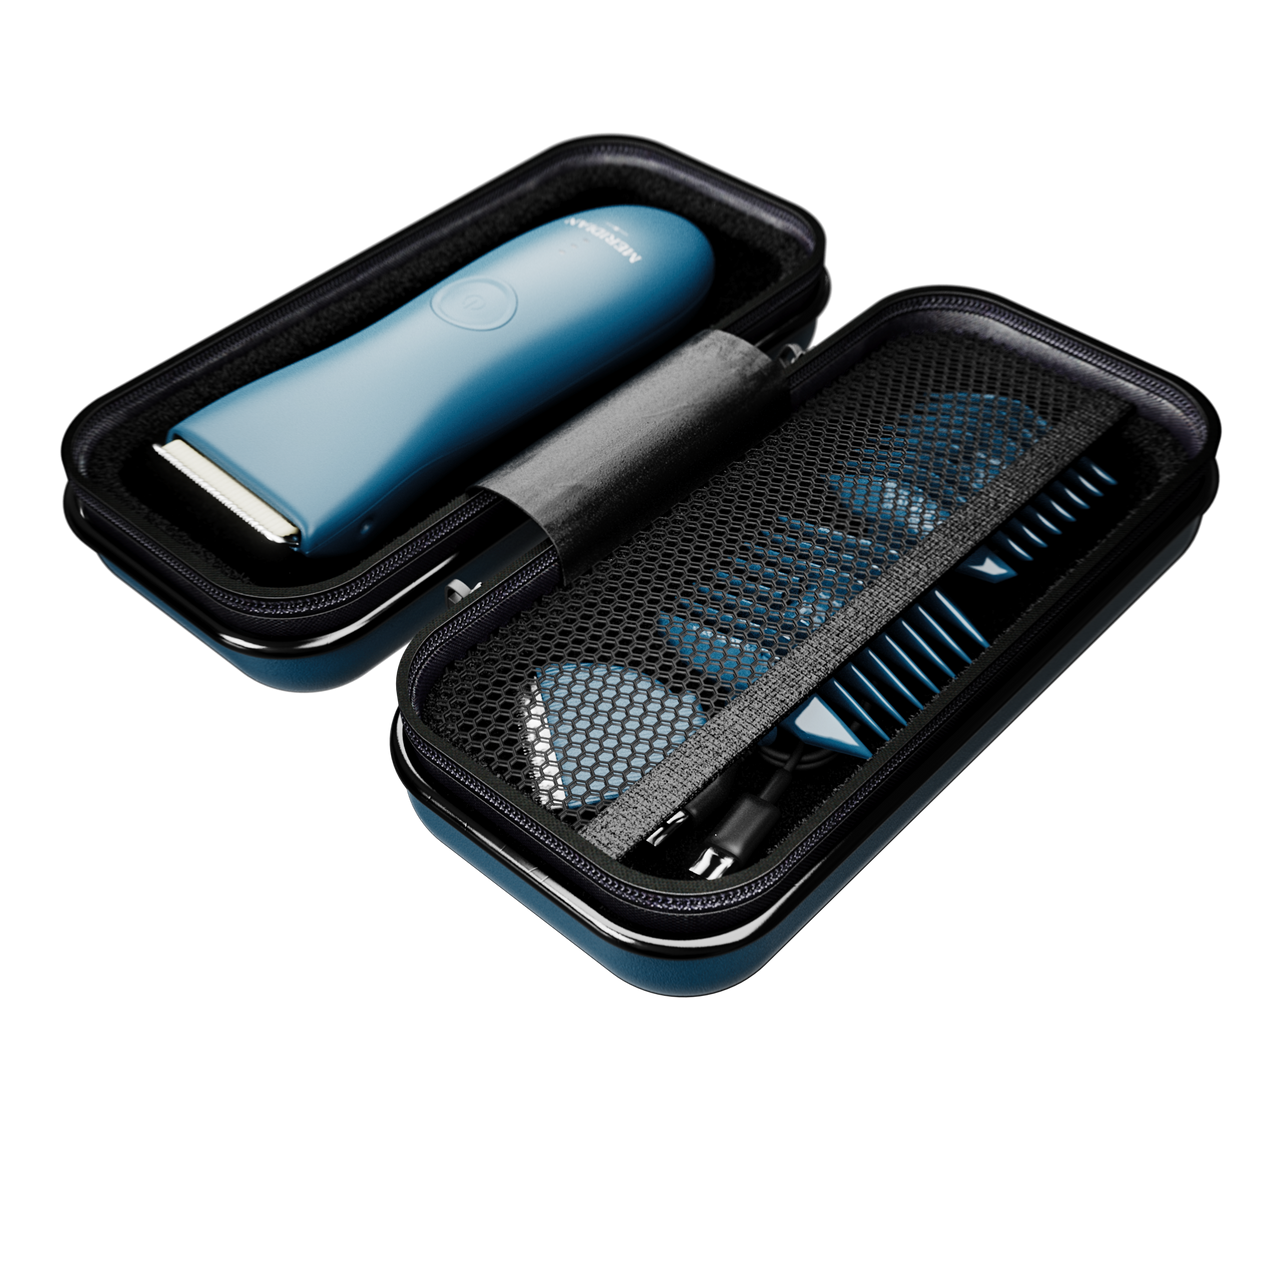 Travel case opened with the trimmer inside